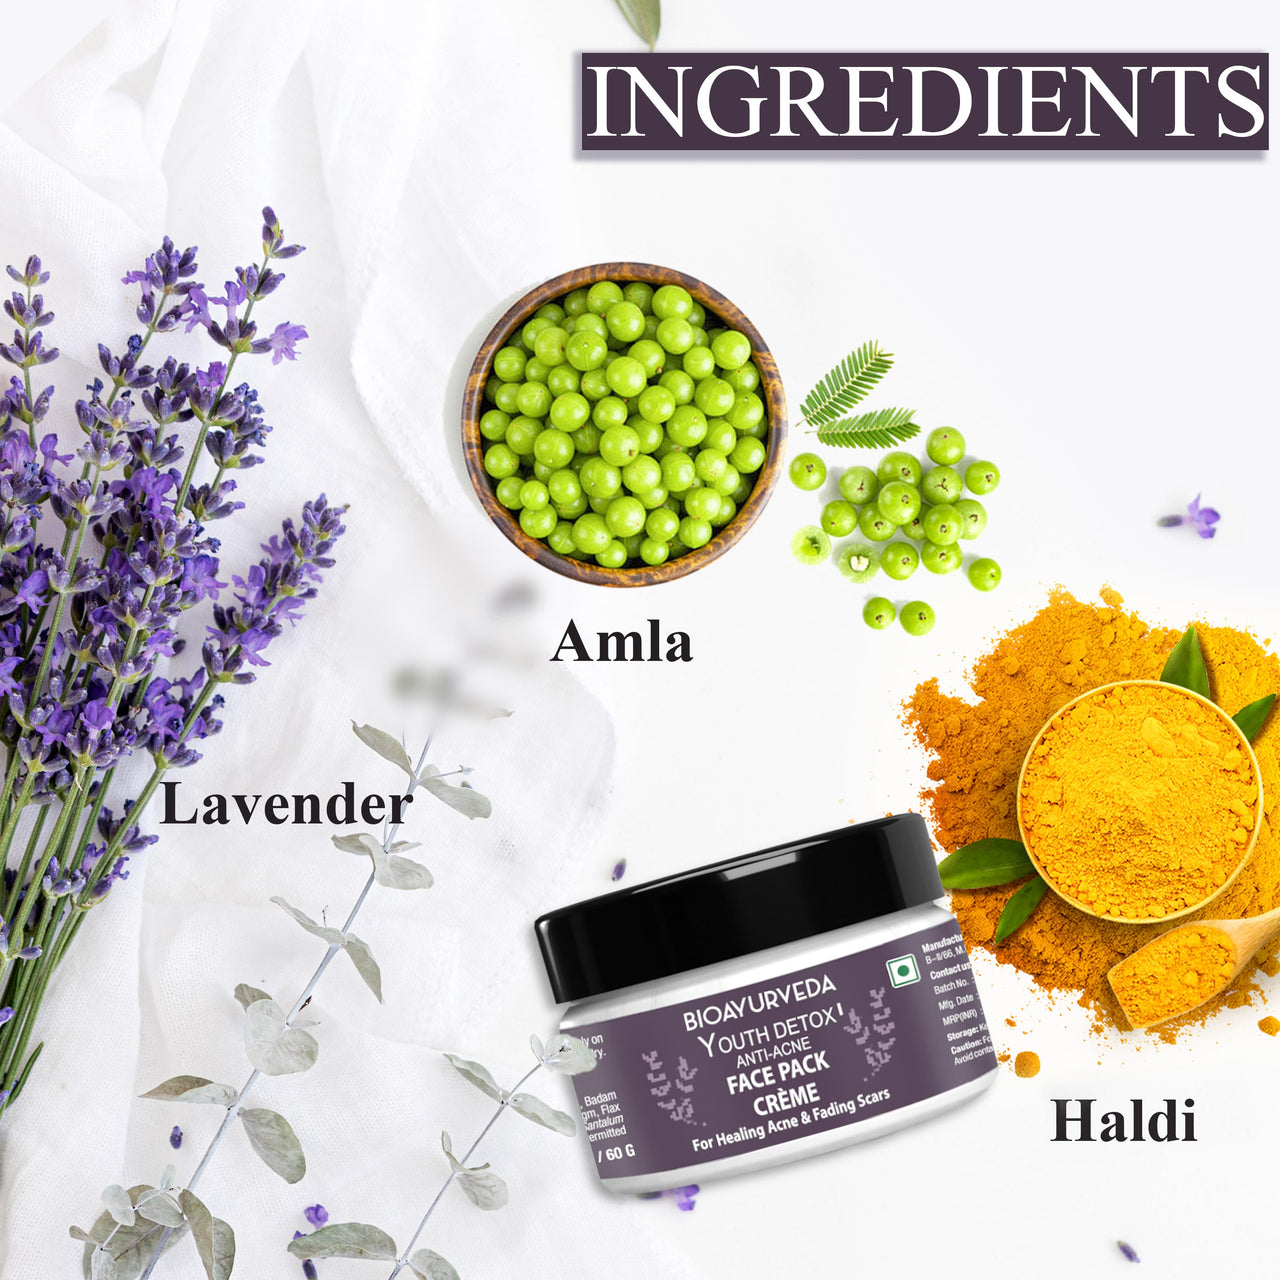 Youth Detox Anti-Acne Face Pack Cream Ingredients